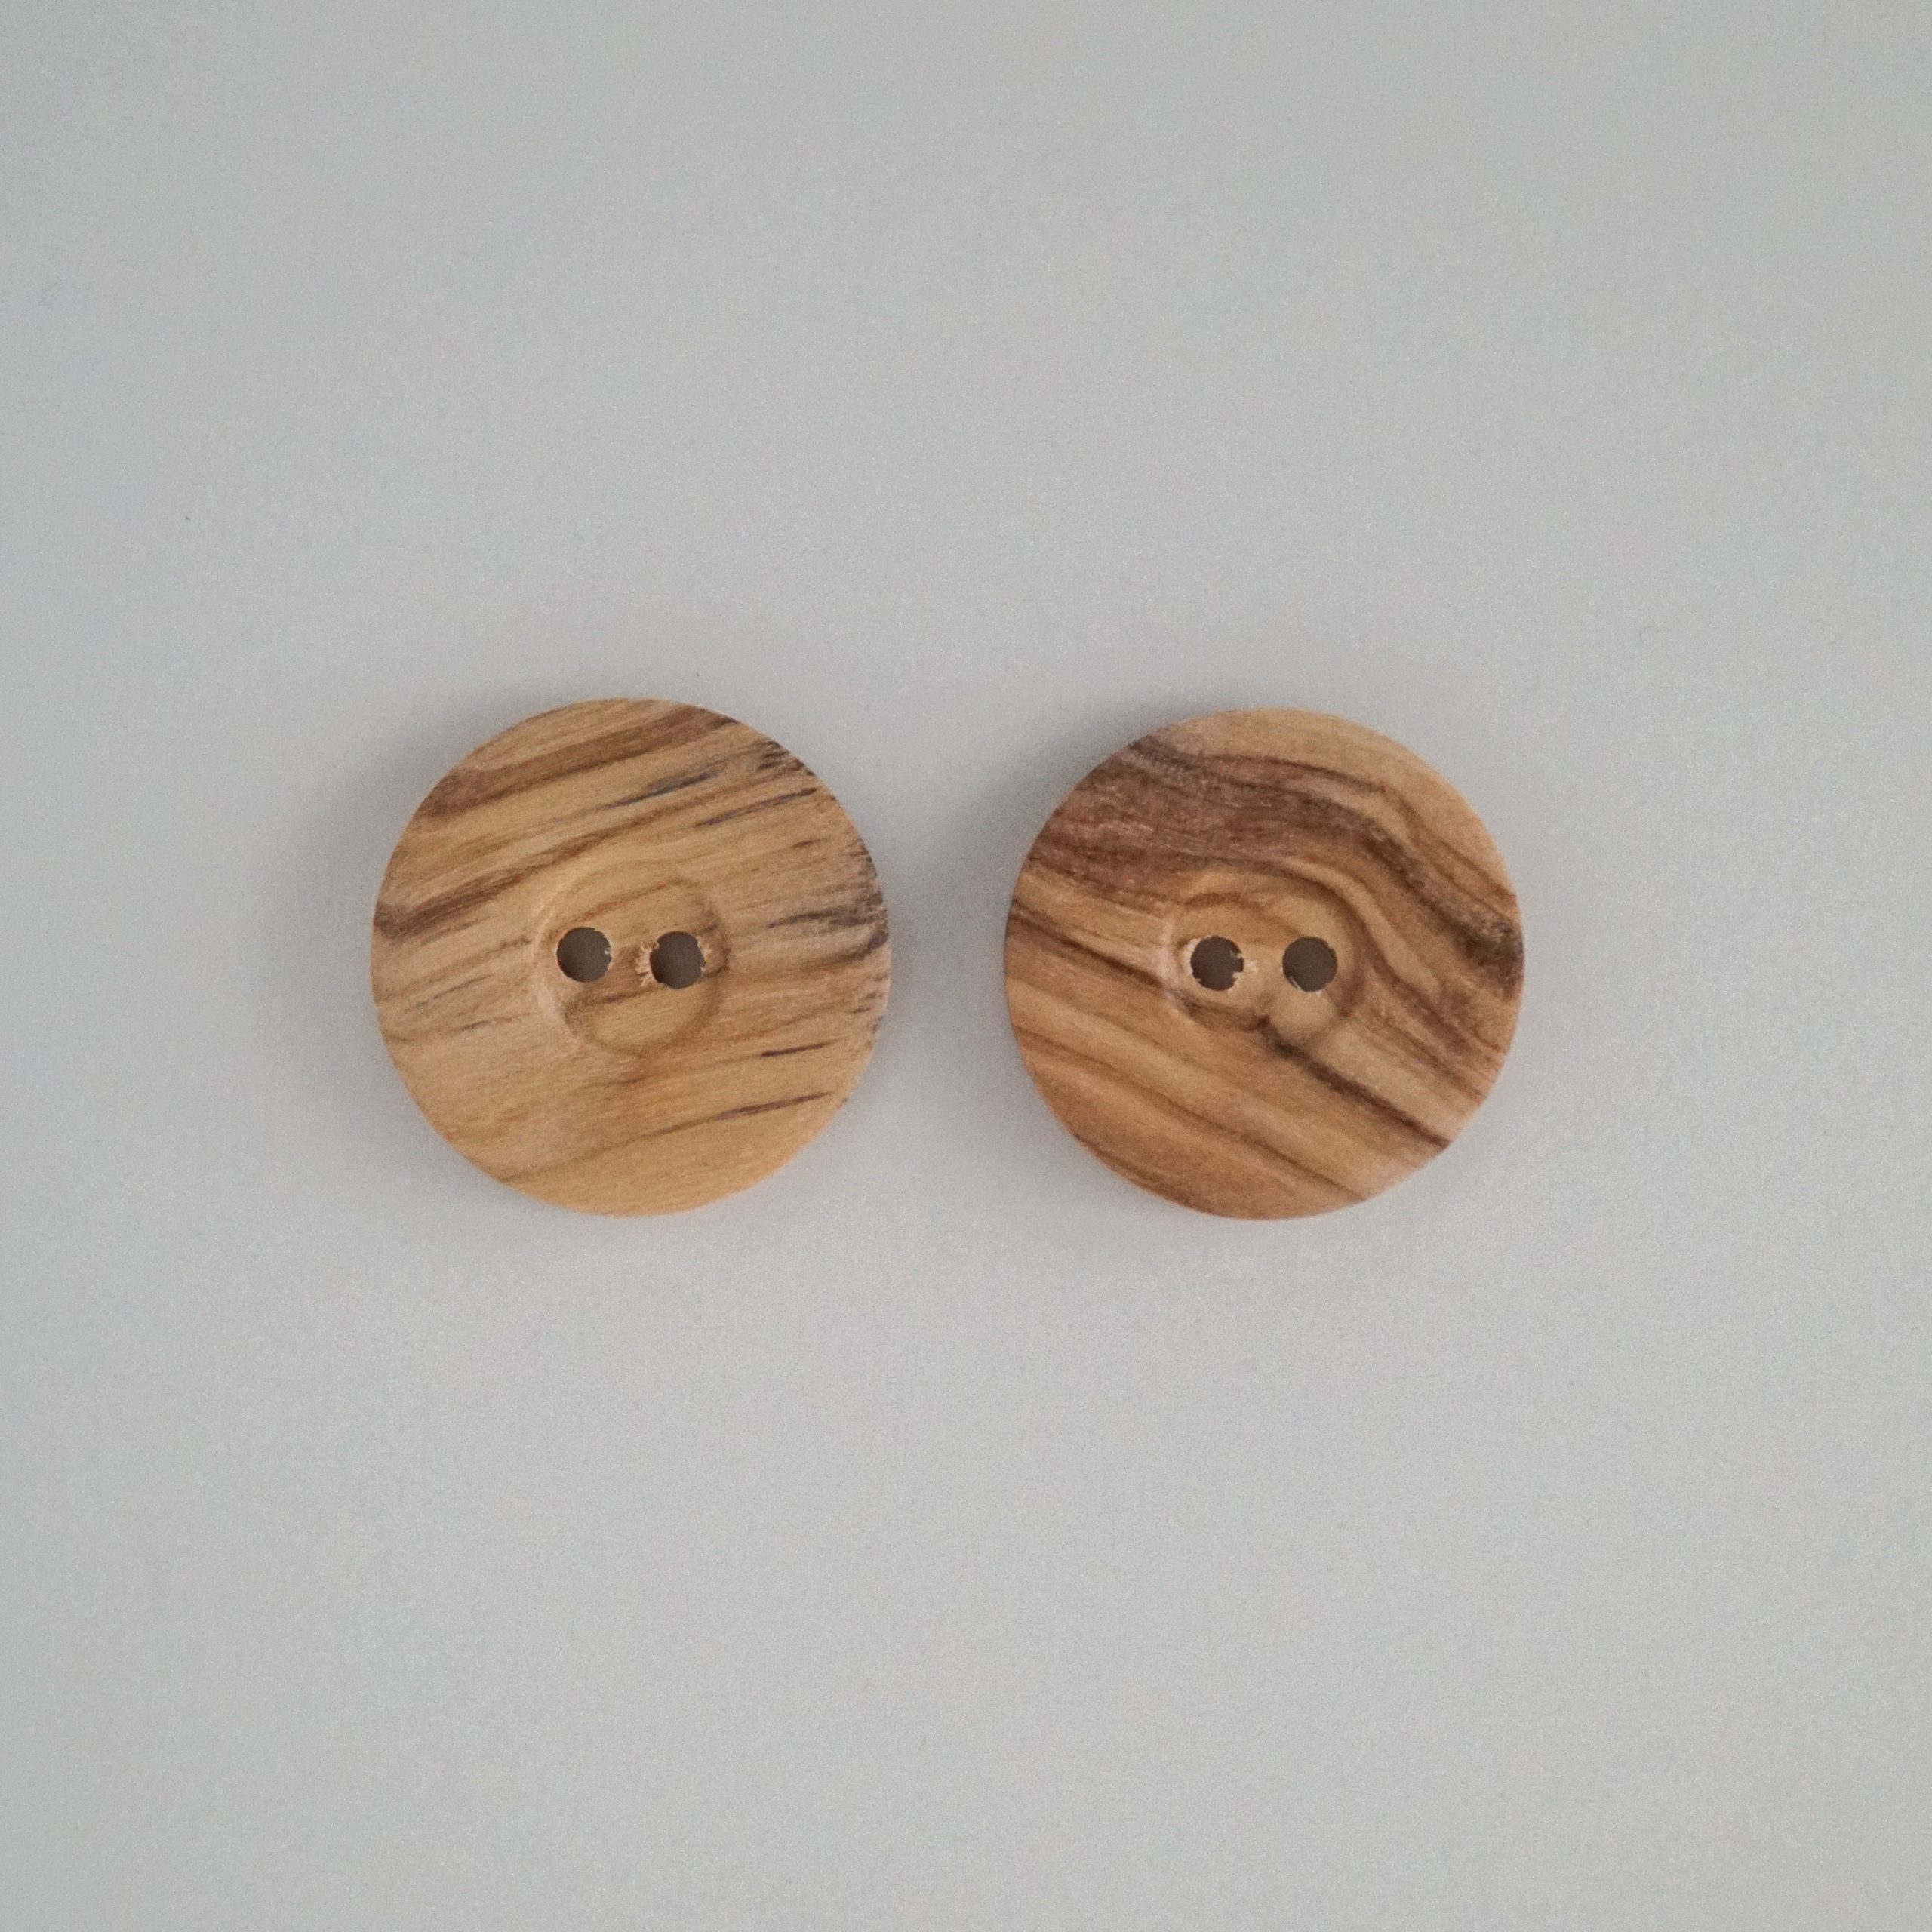 wood buttons knitting - Wooden button | Wood button 2 holes | knitting - by HipKnitShop - 29/10/2018